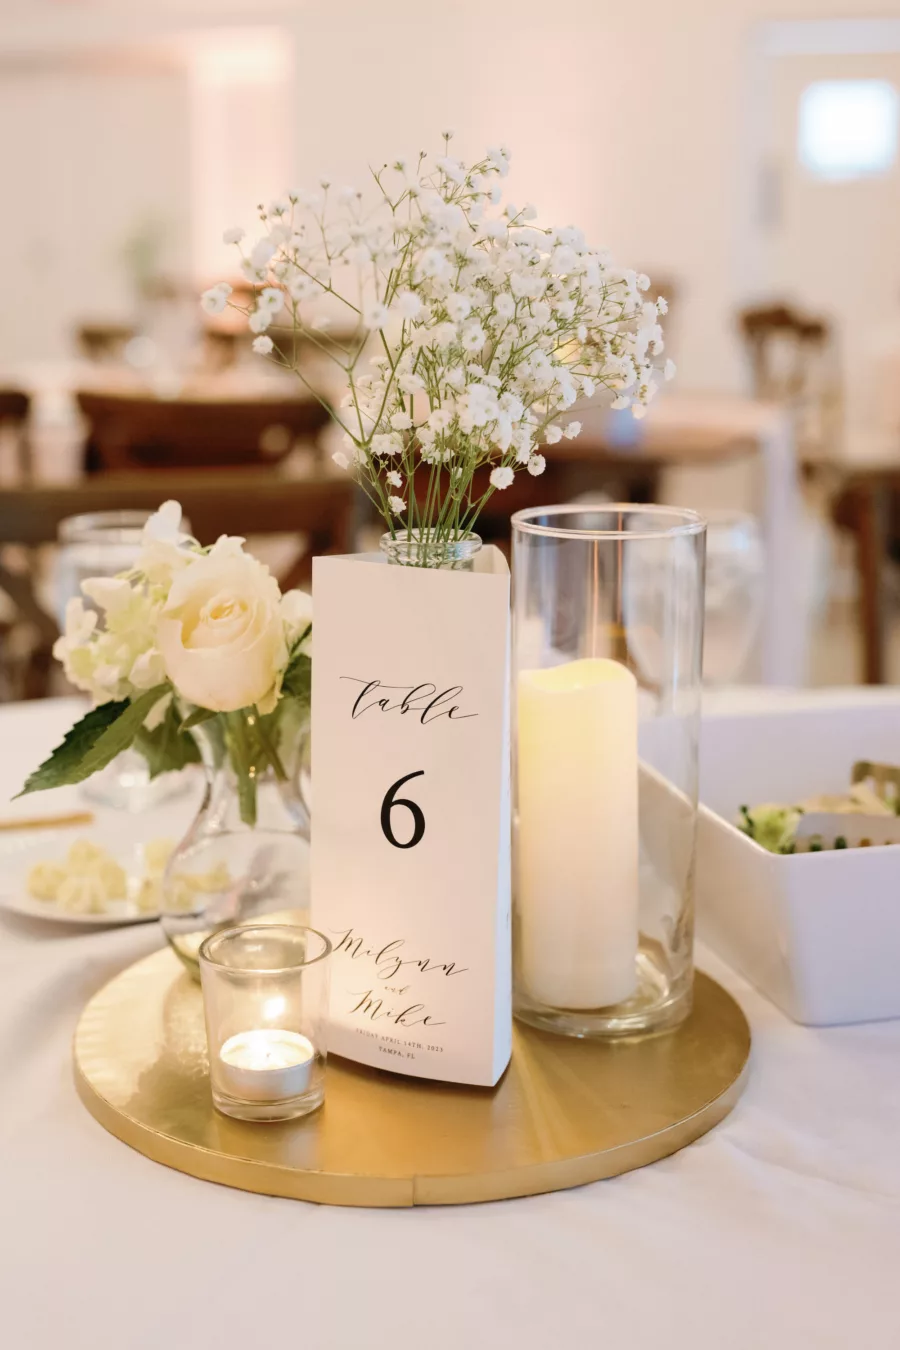 Vintage Wedding Reception Centerpiece Decor Inspiration | White Baby's Breath, Roses, and Candles